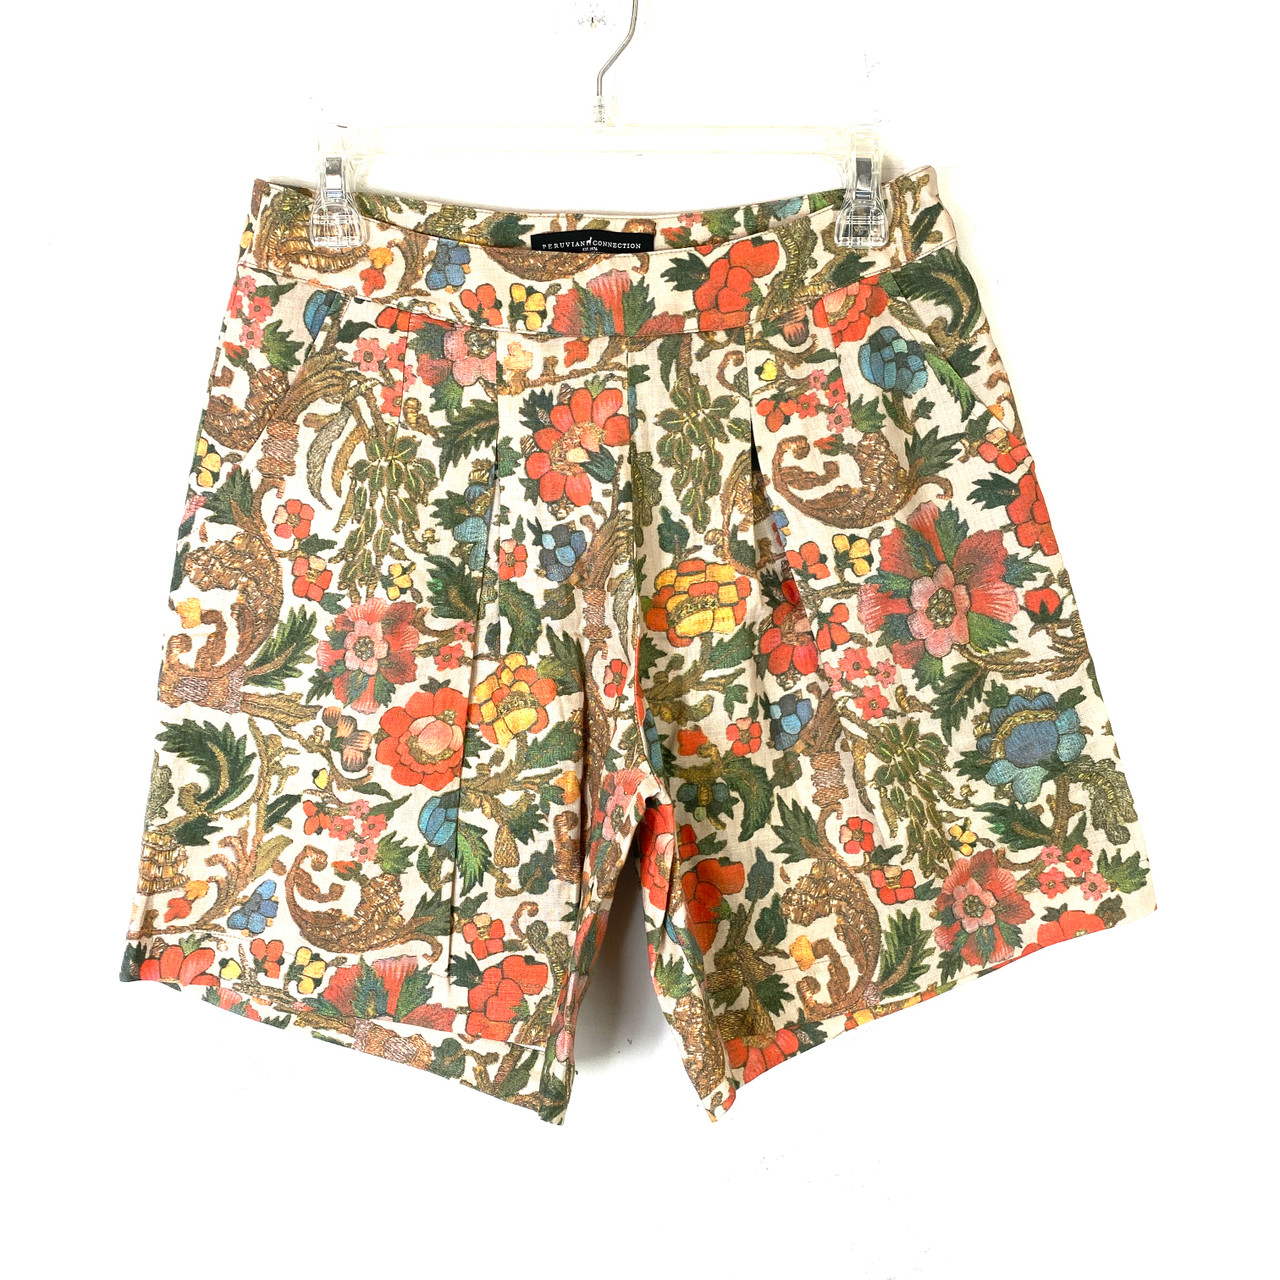 Image of Peruvian Connection Floral Print Giardino Short